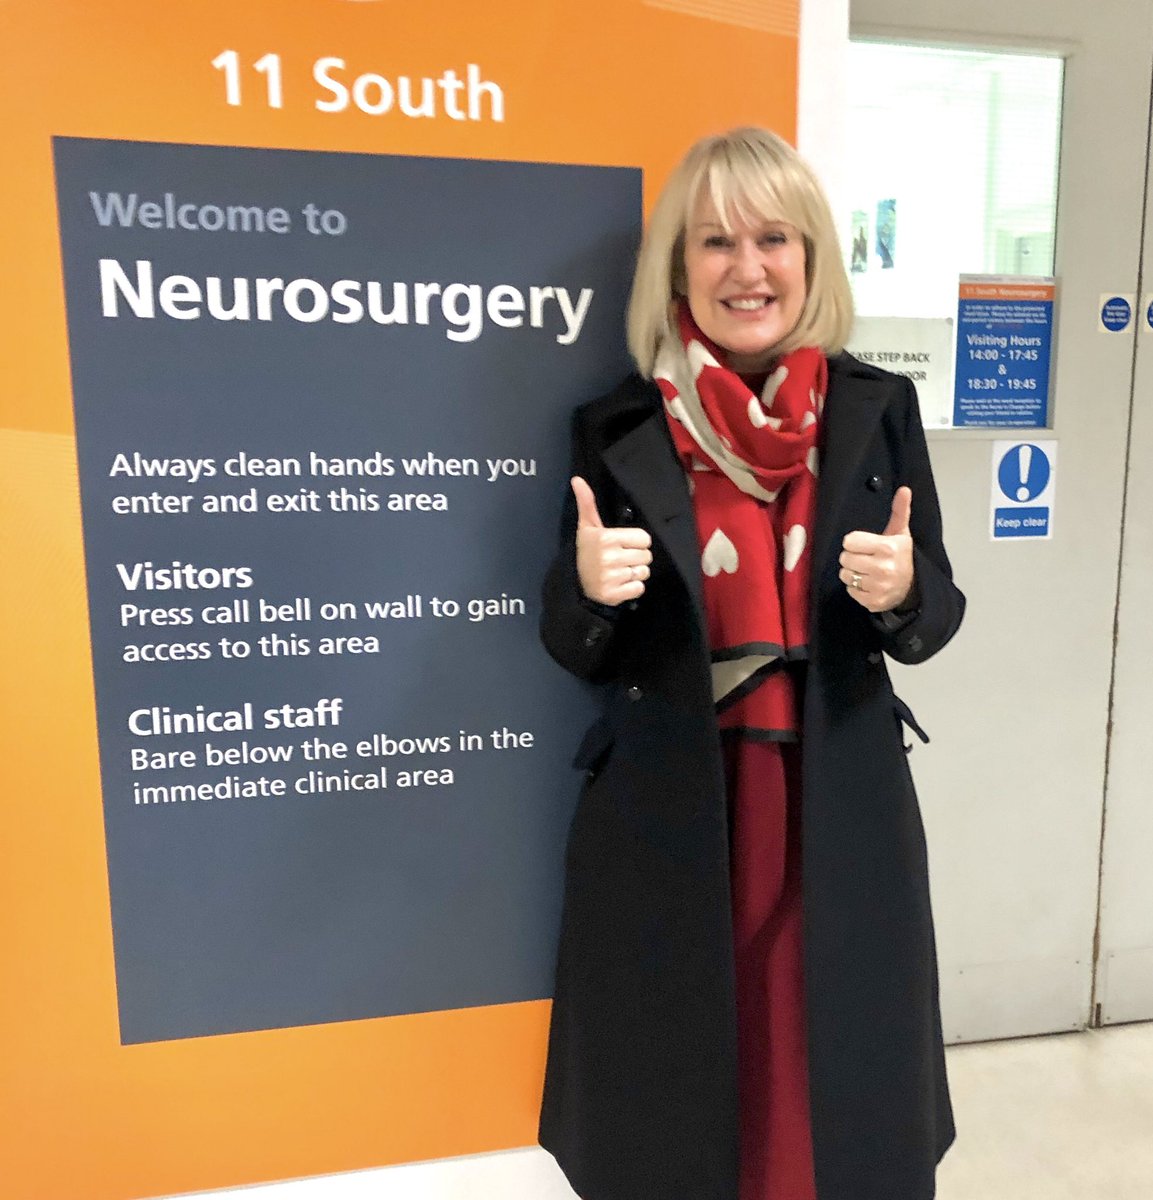 I got the best news this week: 6 months after my surgery, my consultant (also my hero) has said the remaining tumour hasn’t grown. Small steps but a huge relief. My grateful thanks to the wonderful team #CharingCrossHospital @ImperialNHS & #neurosurgerydept